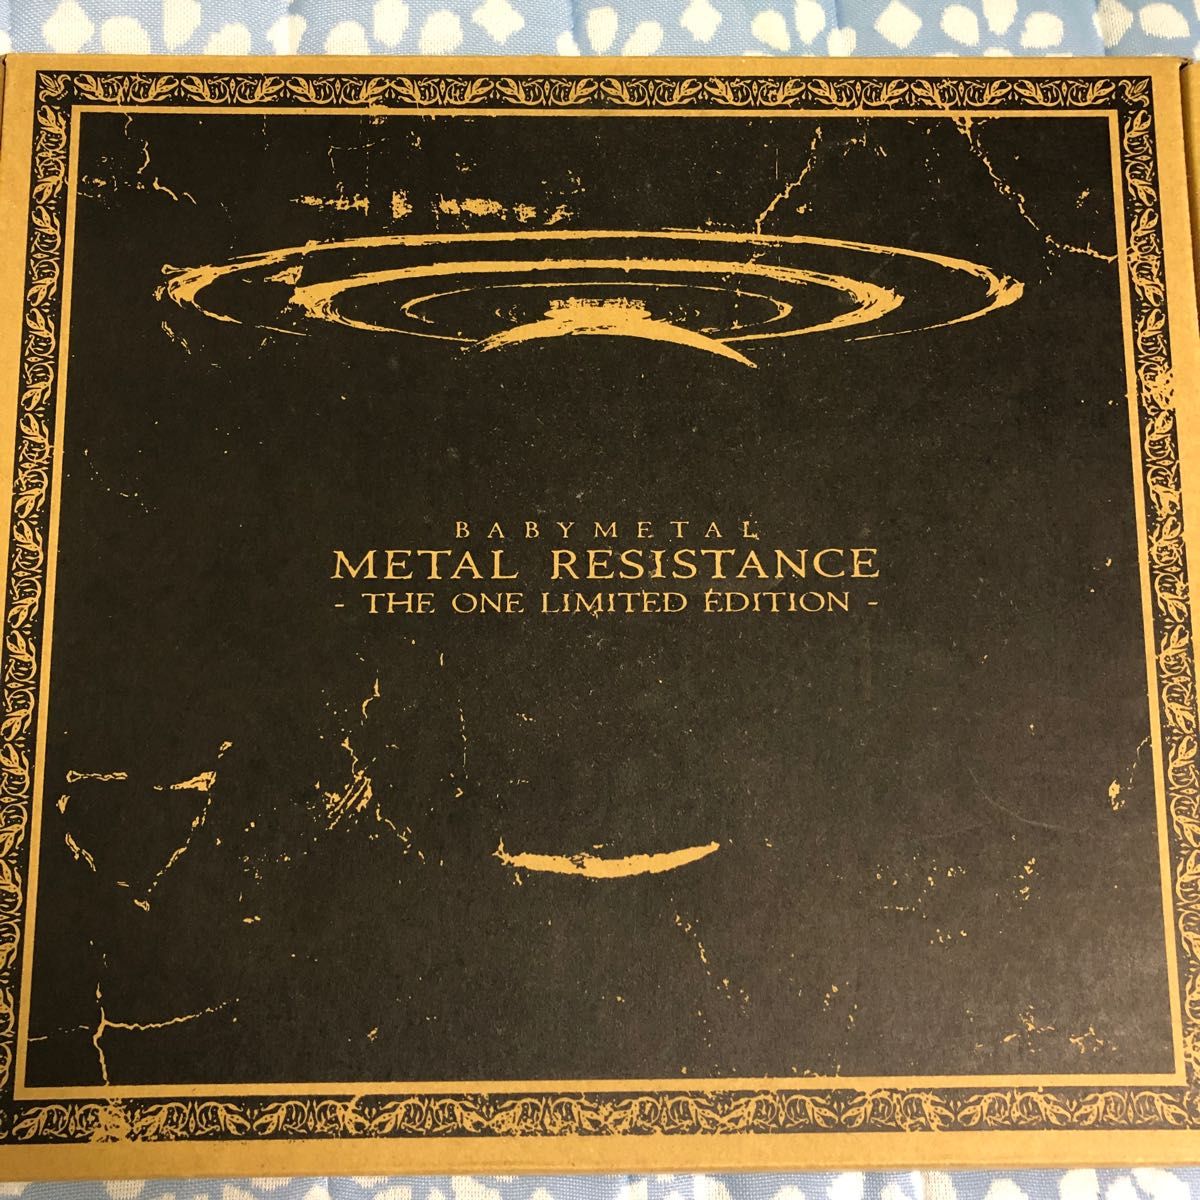 BABYMETAL METAL RESISTANCE 限定盤 CD アルバム  LIMITED EDITION THE ONE